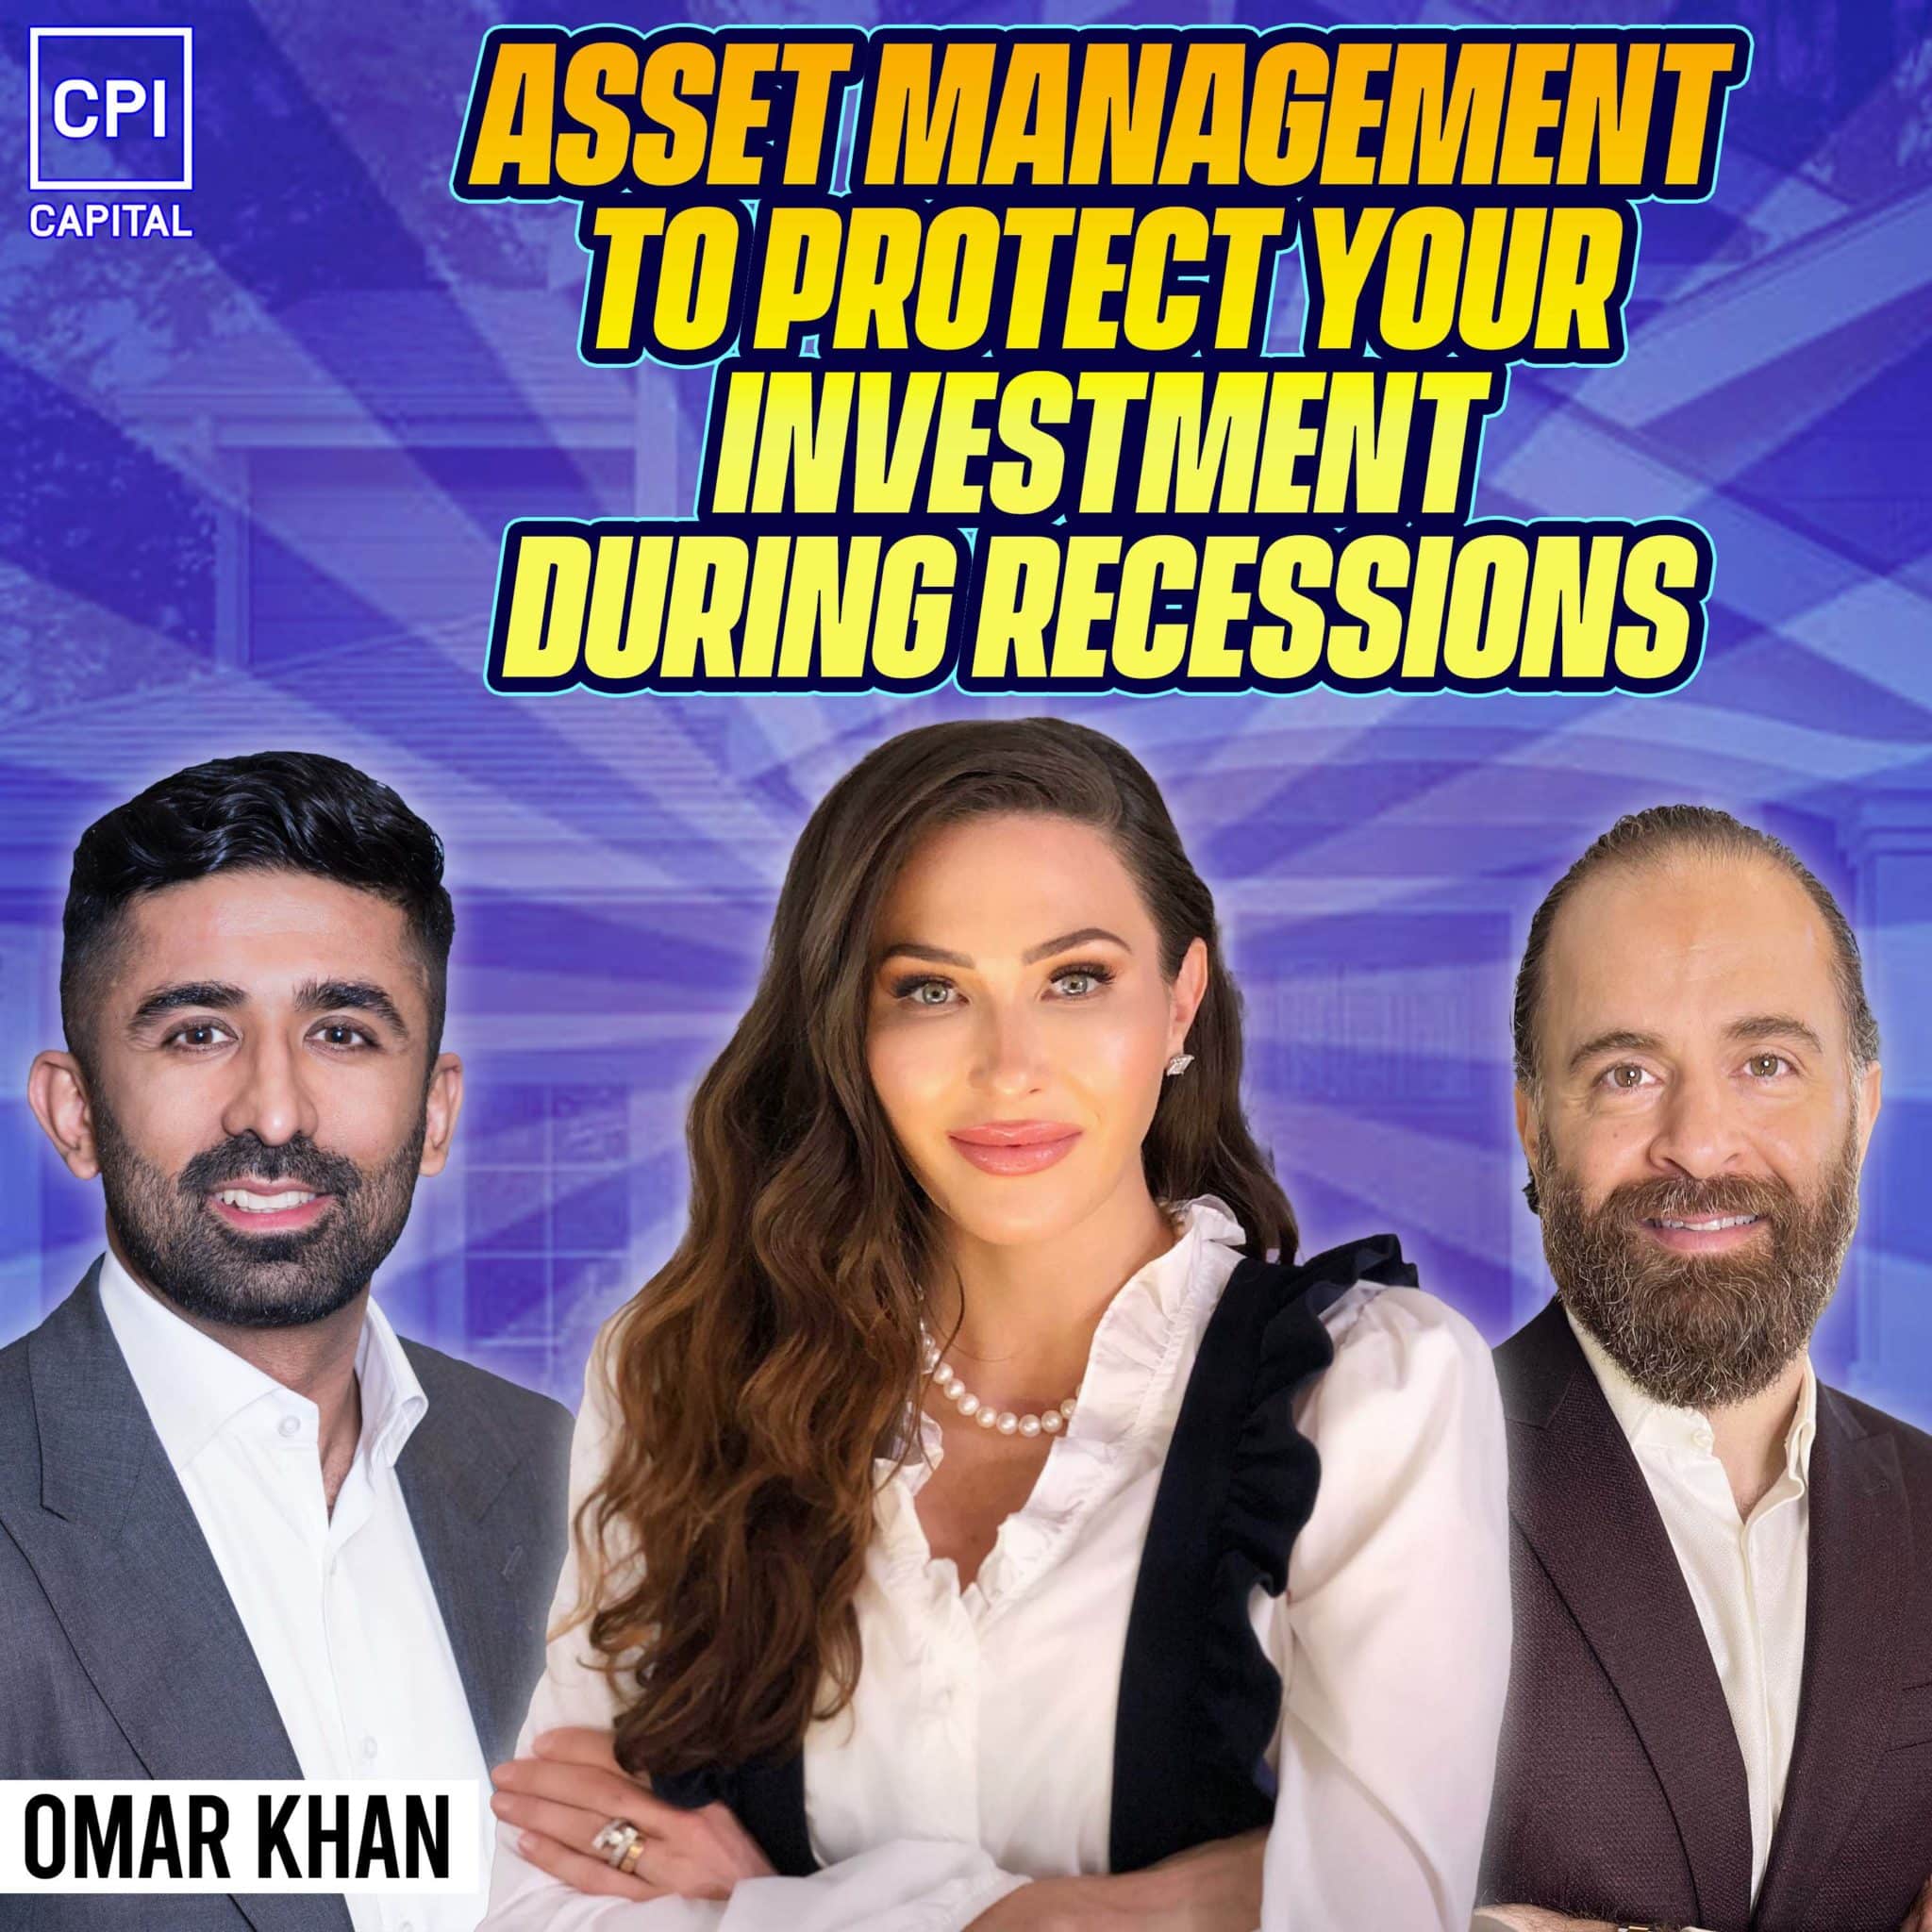 Asset Management To Protect Your Investment During Recessions – Omar Khan